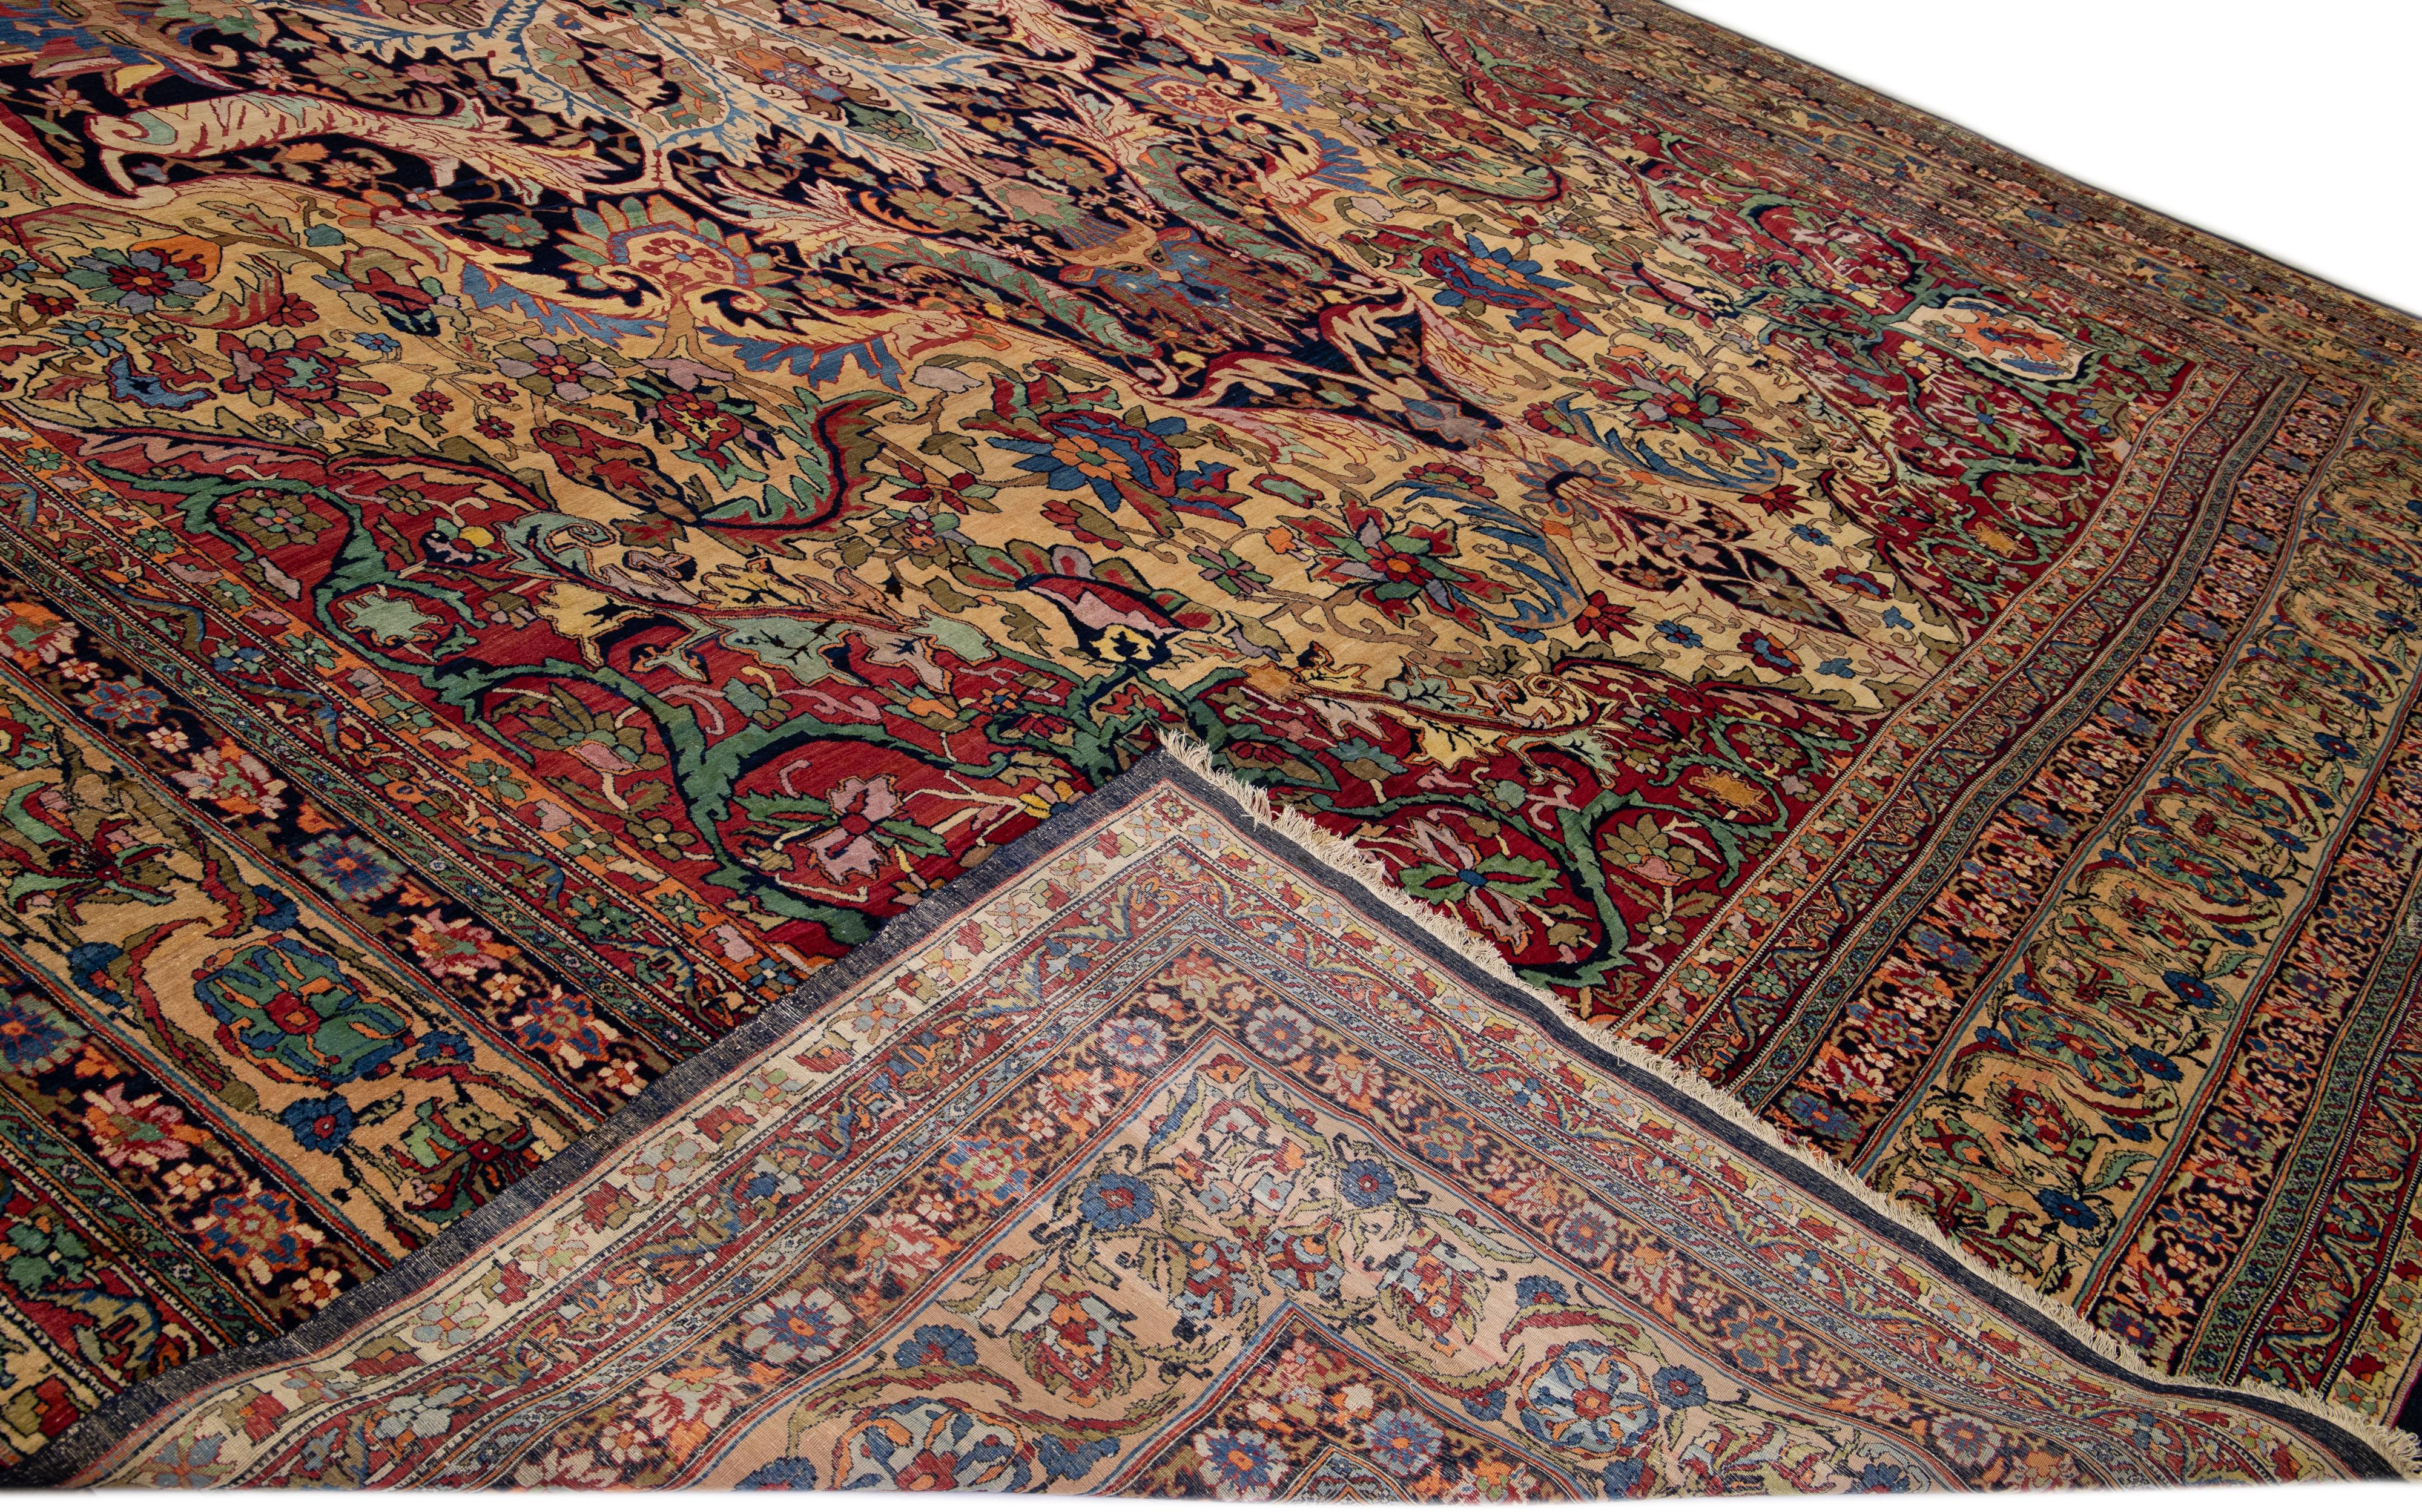 An extraordinary Beautiful antique Kirman hand-knotted wool rug with a beige and red field. This Persian rug has multicolor accents in a gorgeous medallion floral pattern design.

This rug measures: 16'9